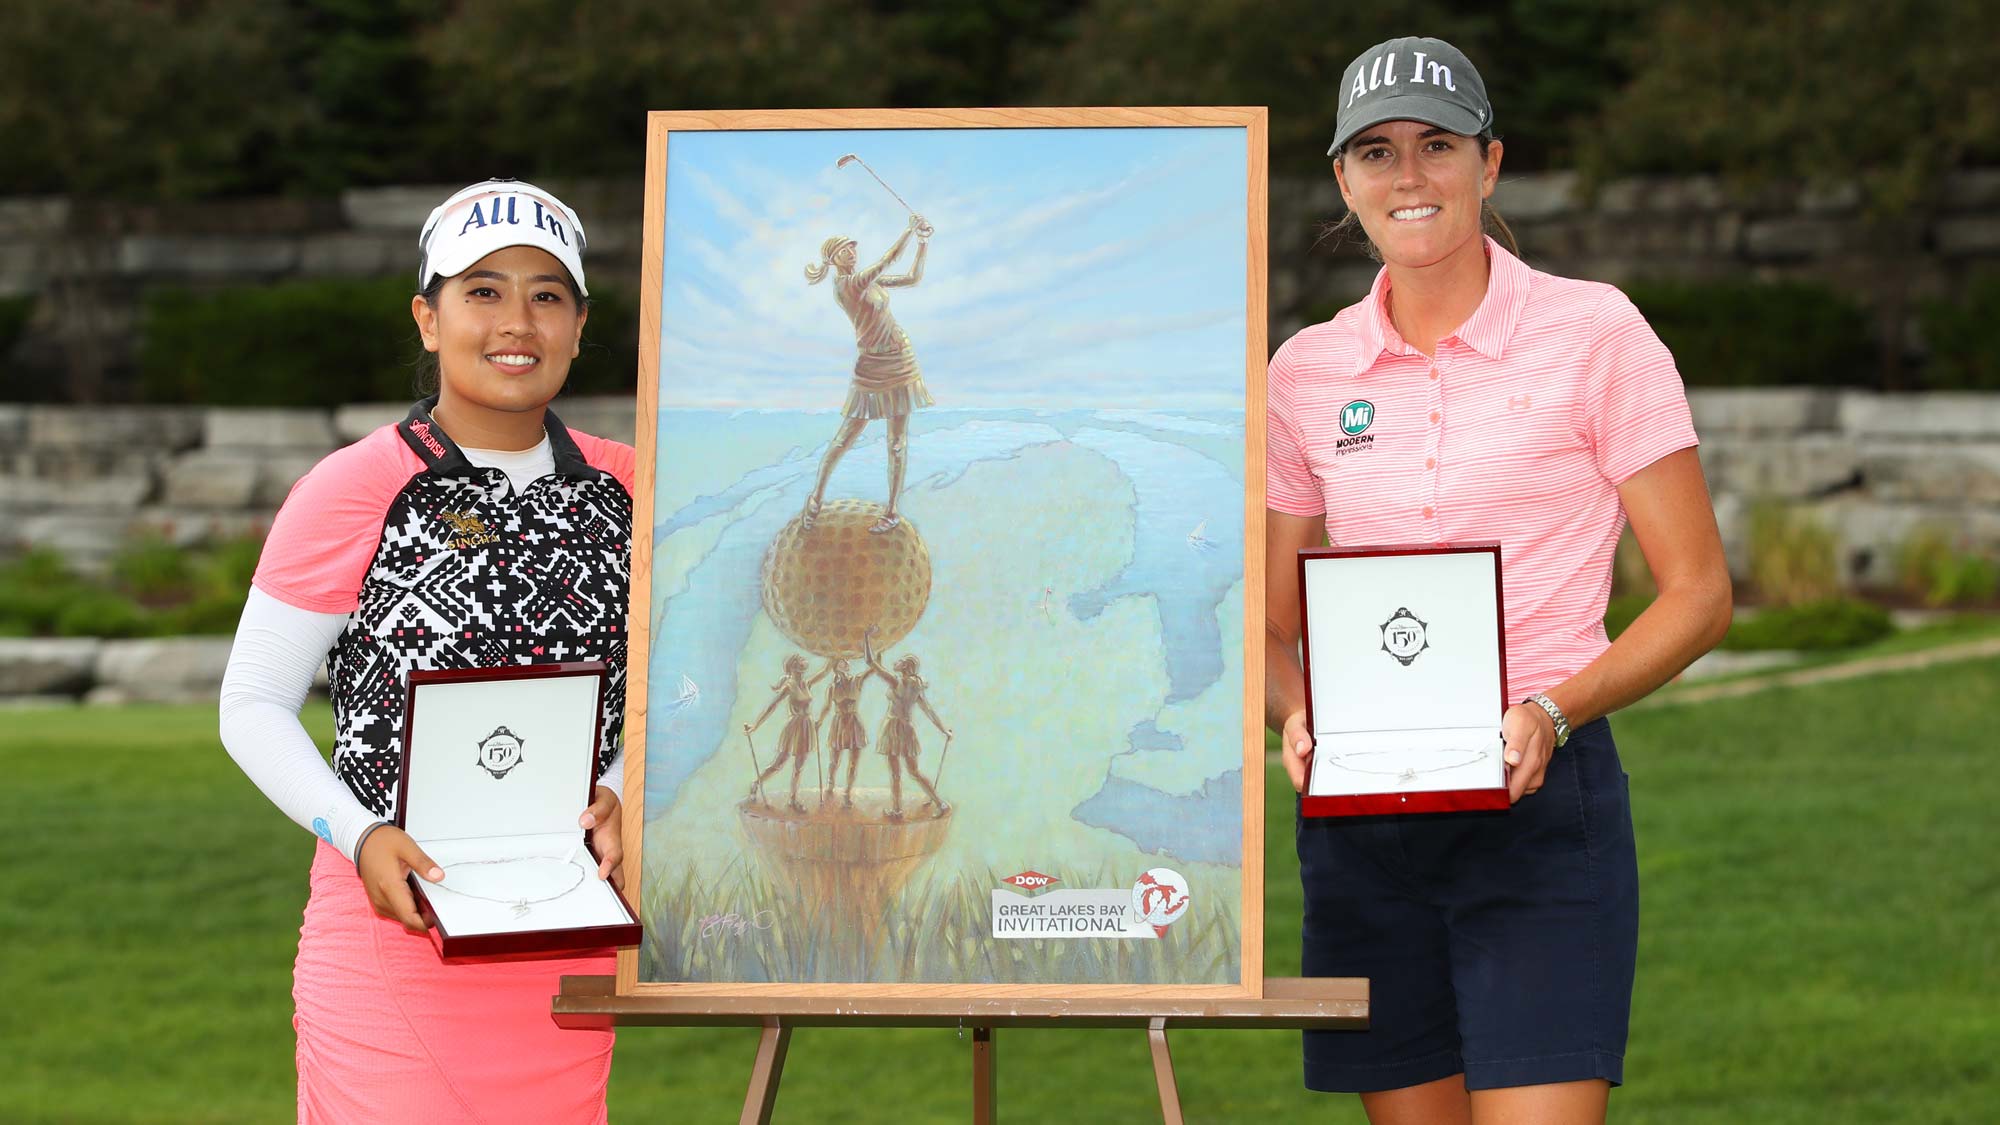 Teammates Cydney Clanton of the United States (R) and Jasmine Suwannapura of Thailand pose with the championship trophy and necklace after winning the Dow Great Lakes Bay Invitational